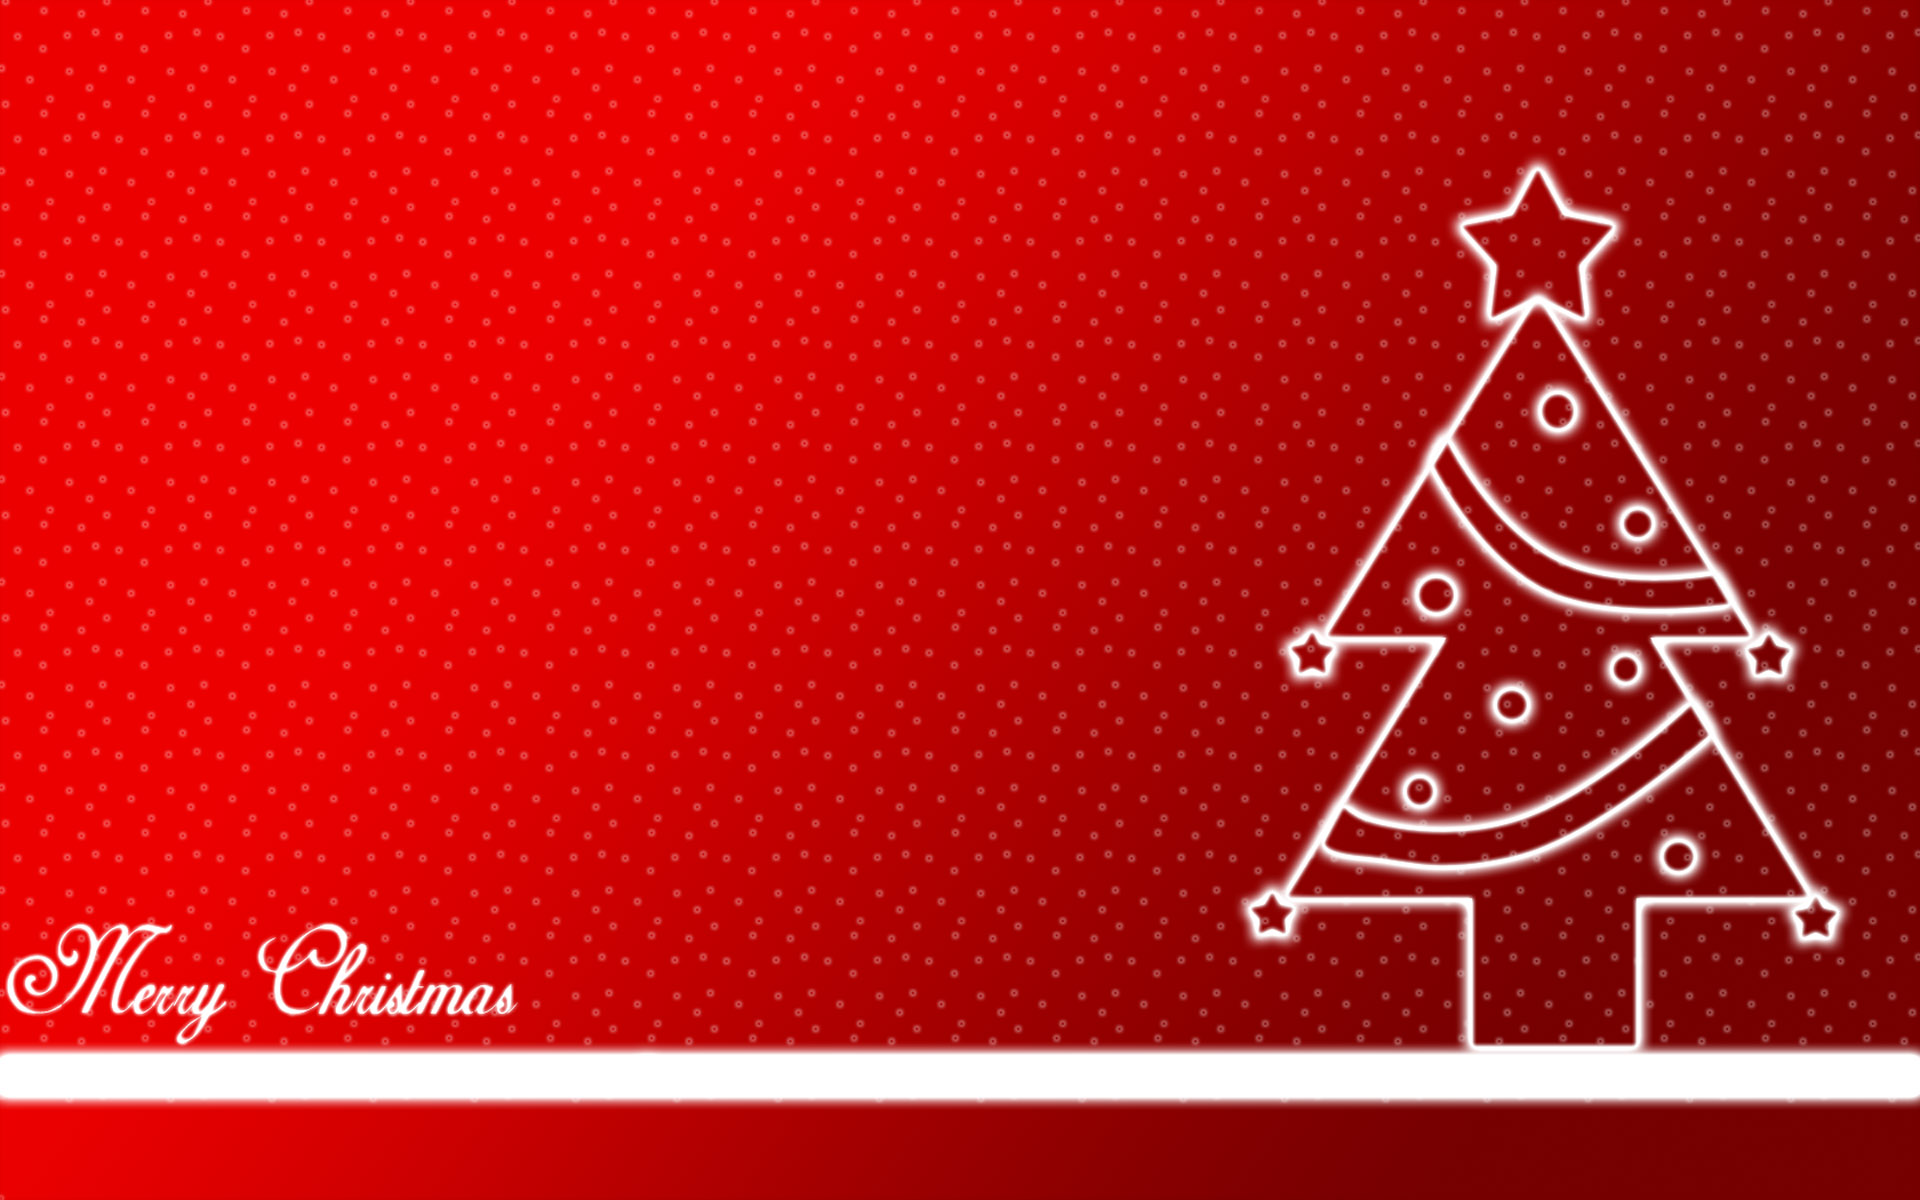 Merry Christmas Wallpaper Red 2016 for PC.